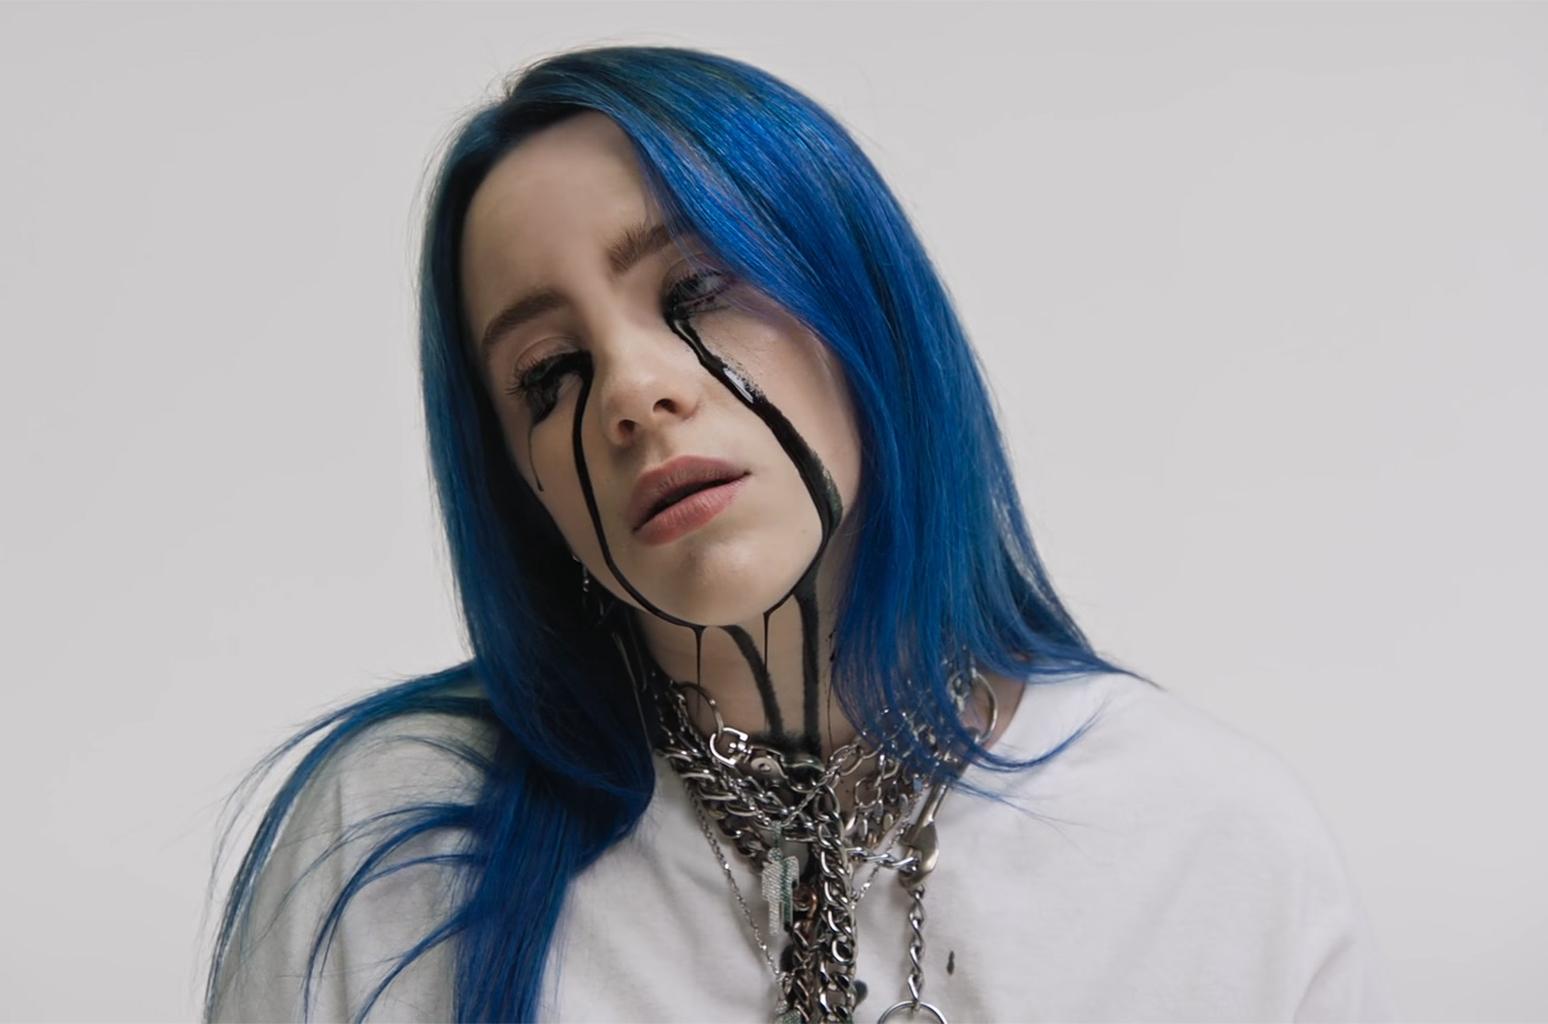 Billie Eilish's Video For 'When The Party's Over': Watch